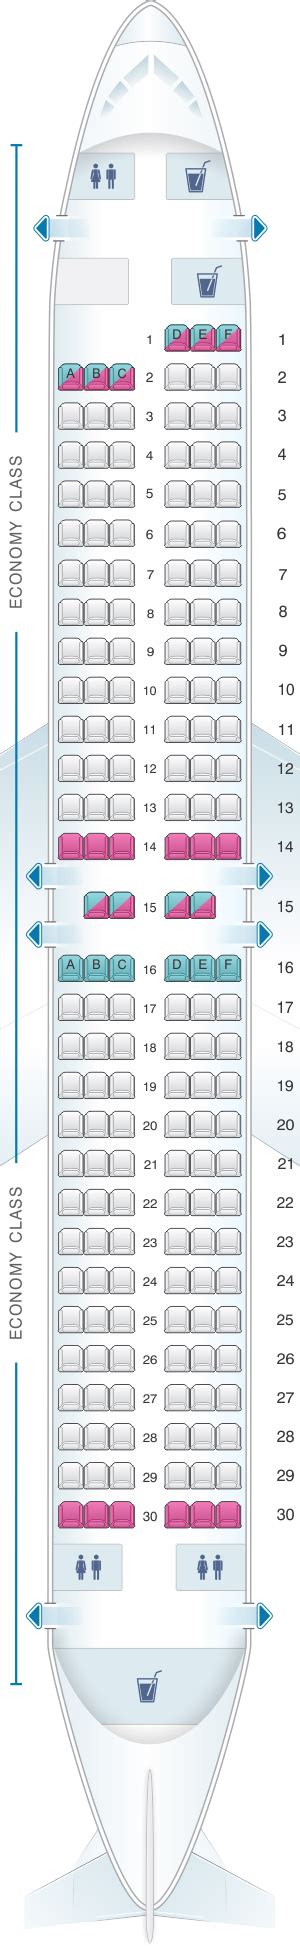 Southwest airlines seat map. 